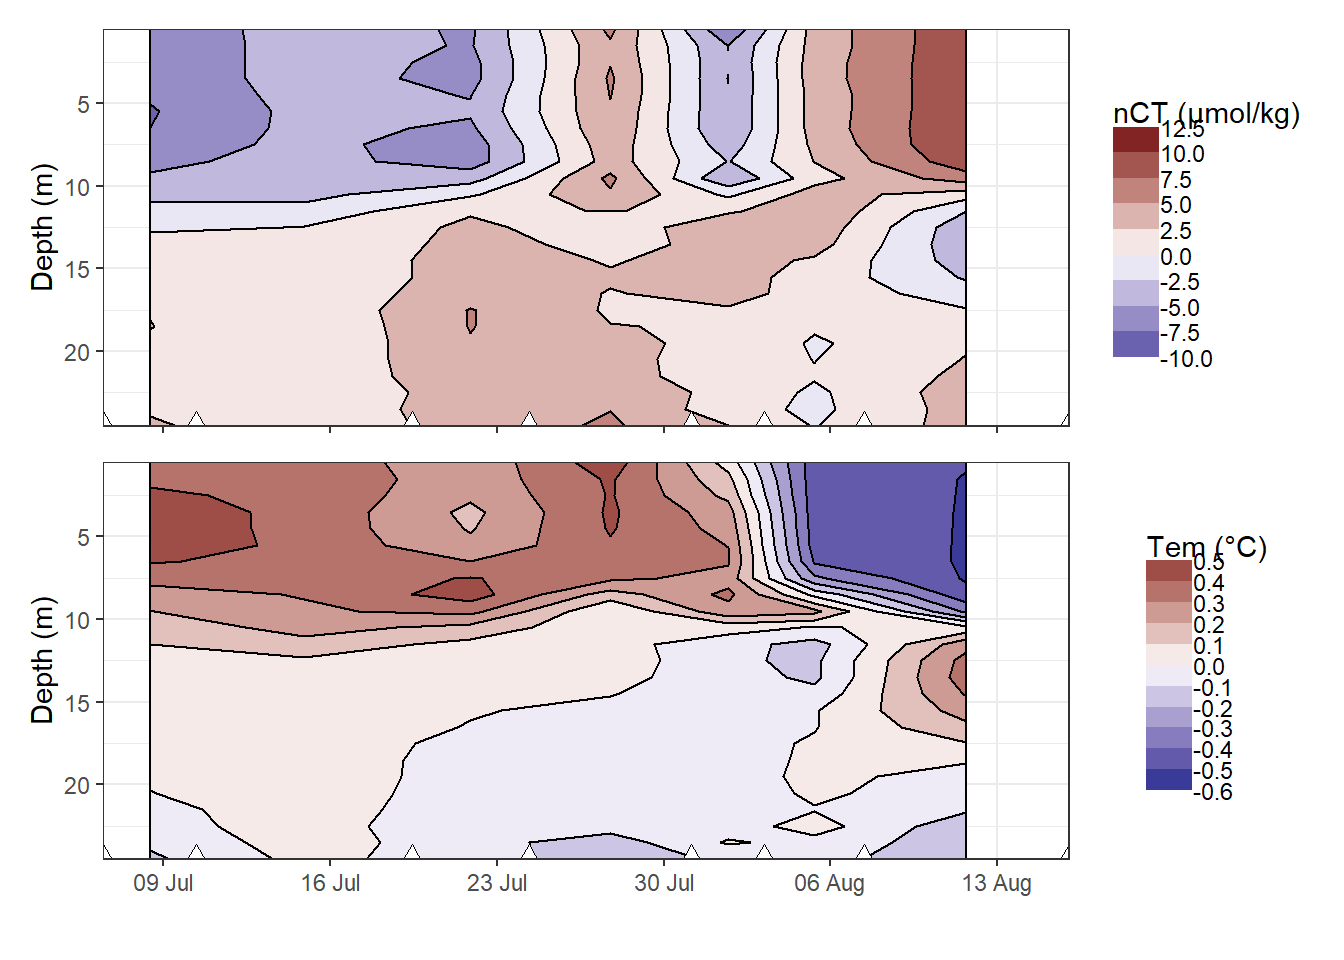 Hovmoeller plotm of daily changes in C~T~ and temperature. Note that calculated  value of change (in contrast to absolute and cumulative values) are referred to the mean dates inbetween cruise, and are not extrapolated to the full observational period.